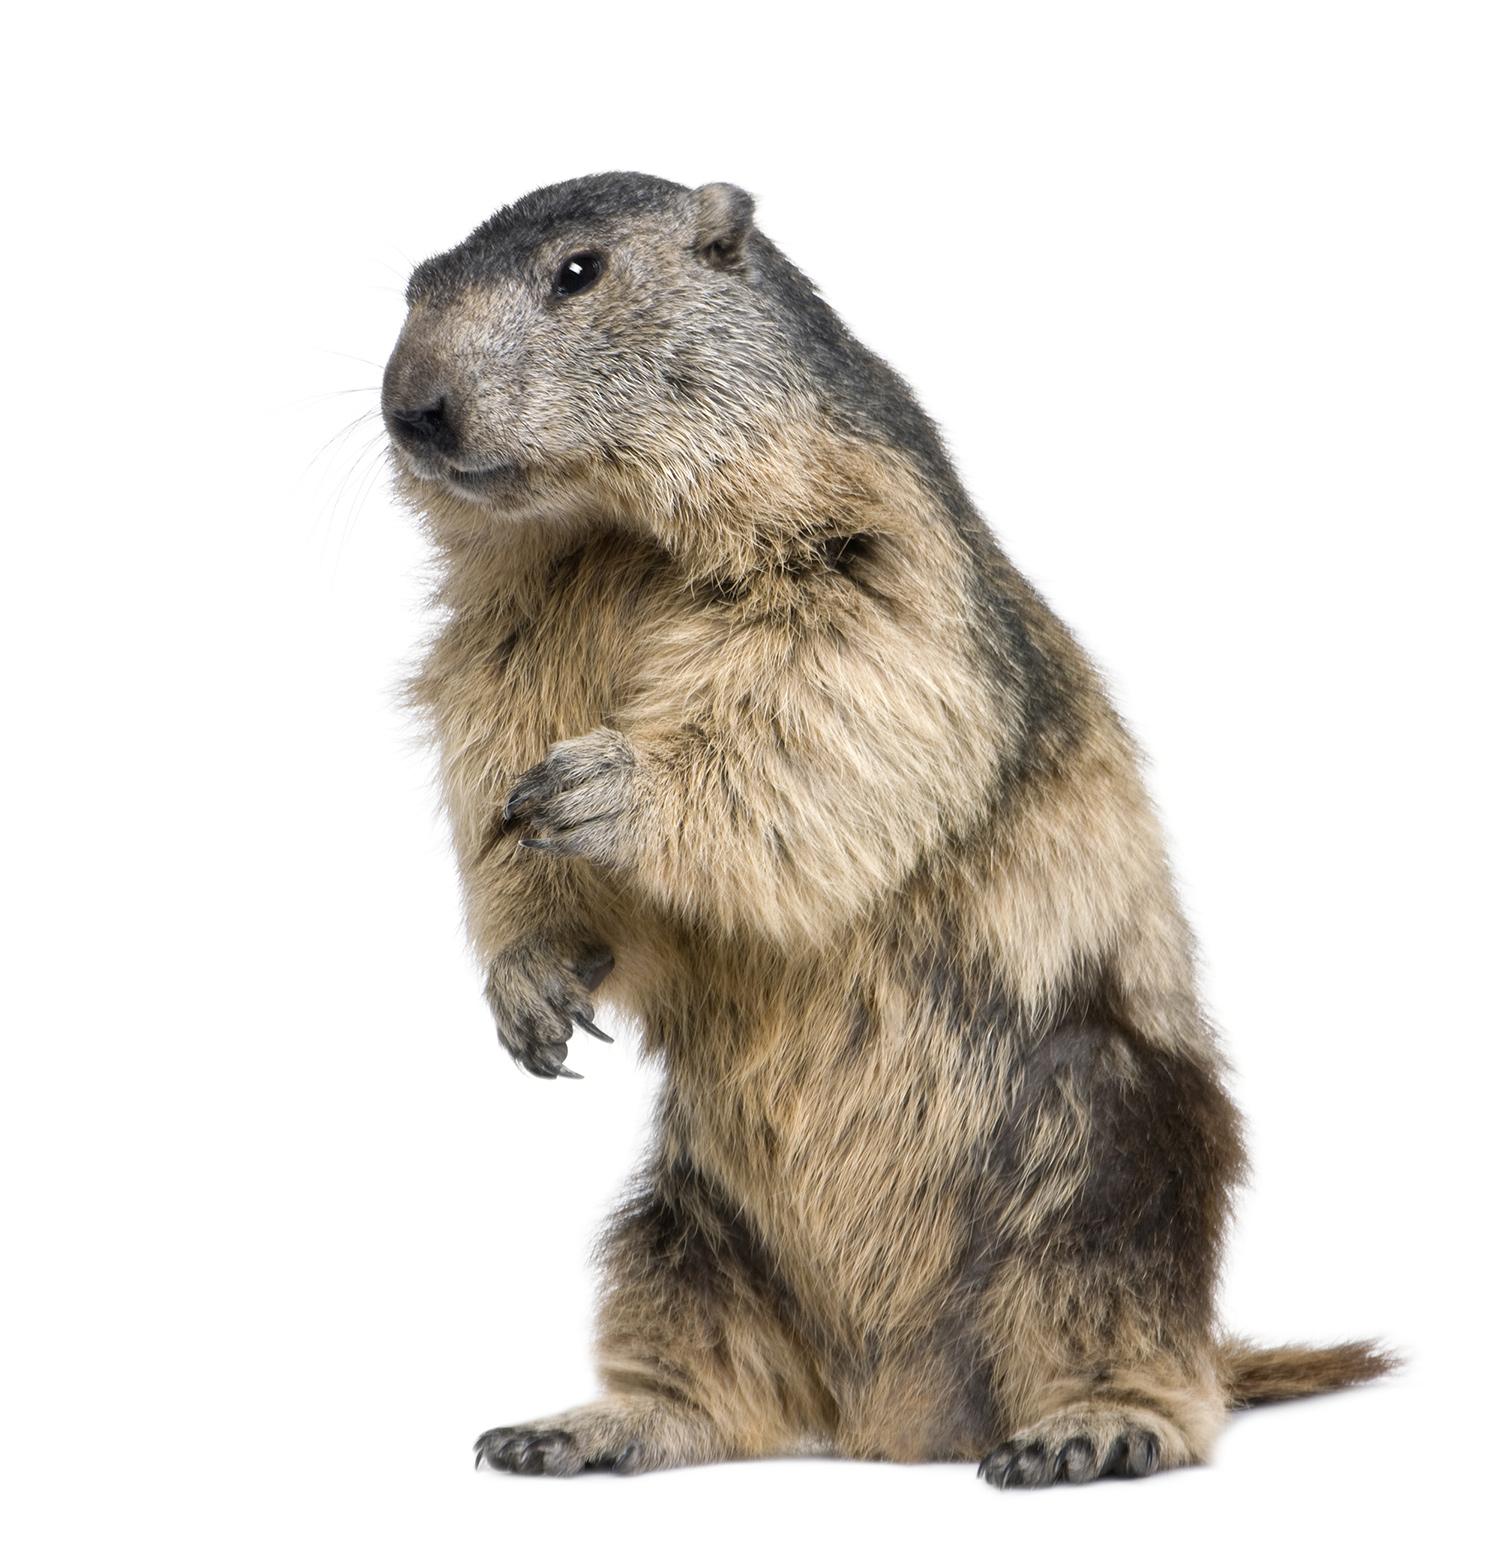 Groundhog Images PNG HD-PlusP